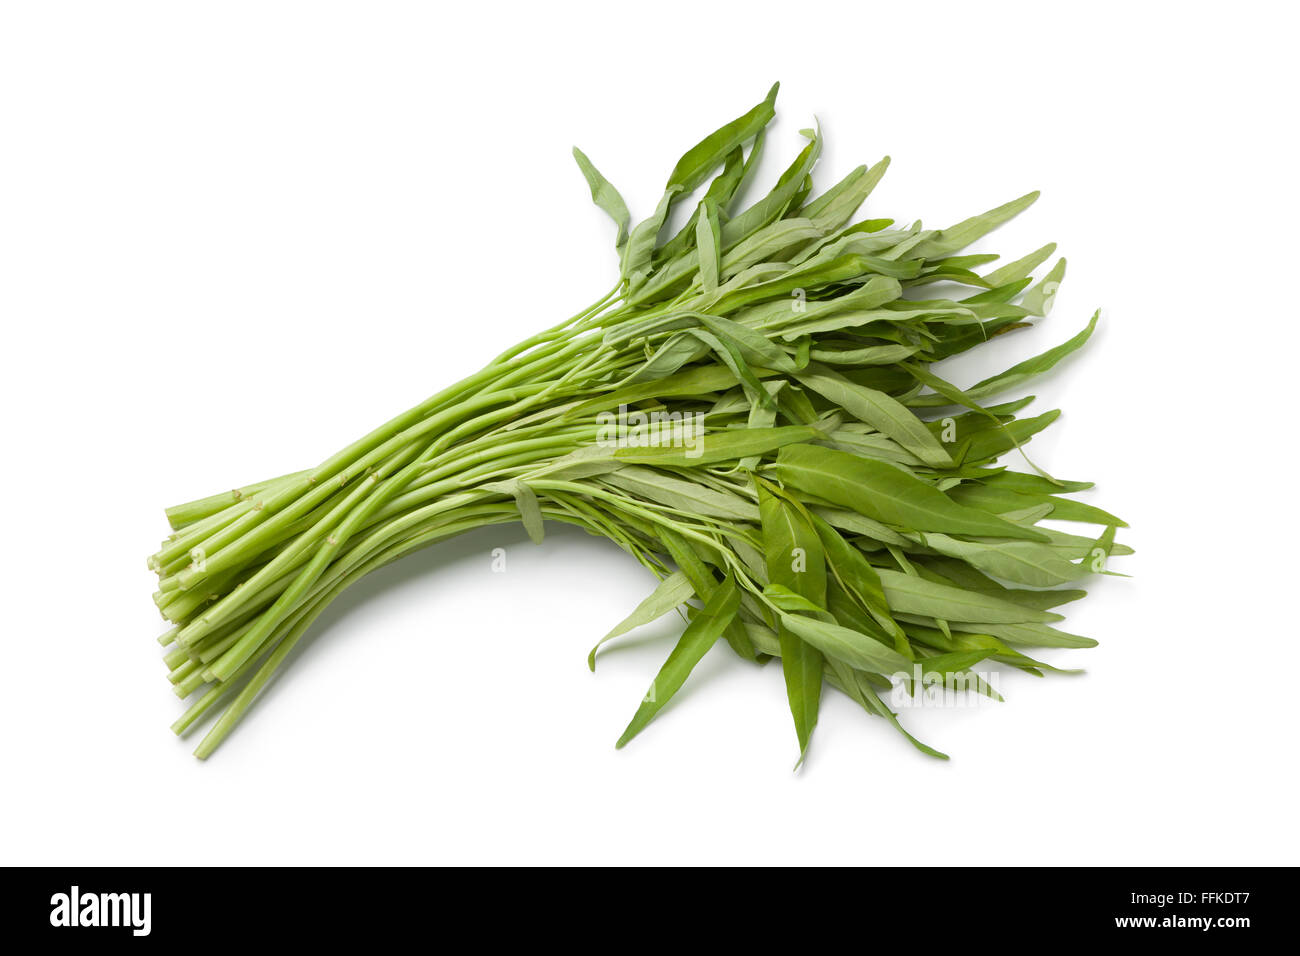 Bunch of Fresh Chinese Water Spinach on white background Stock Photo